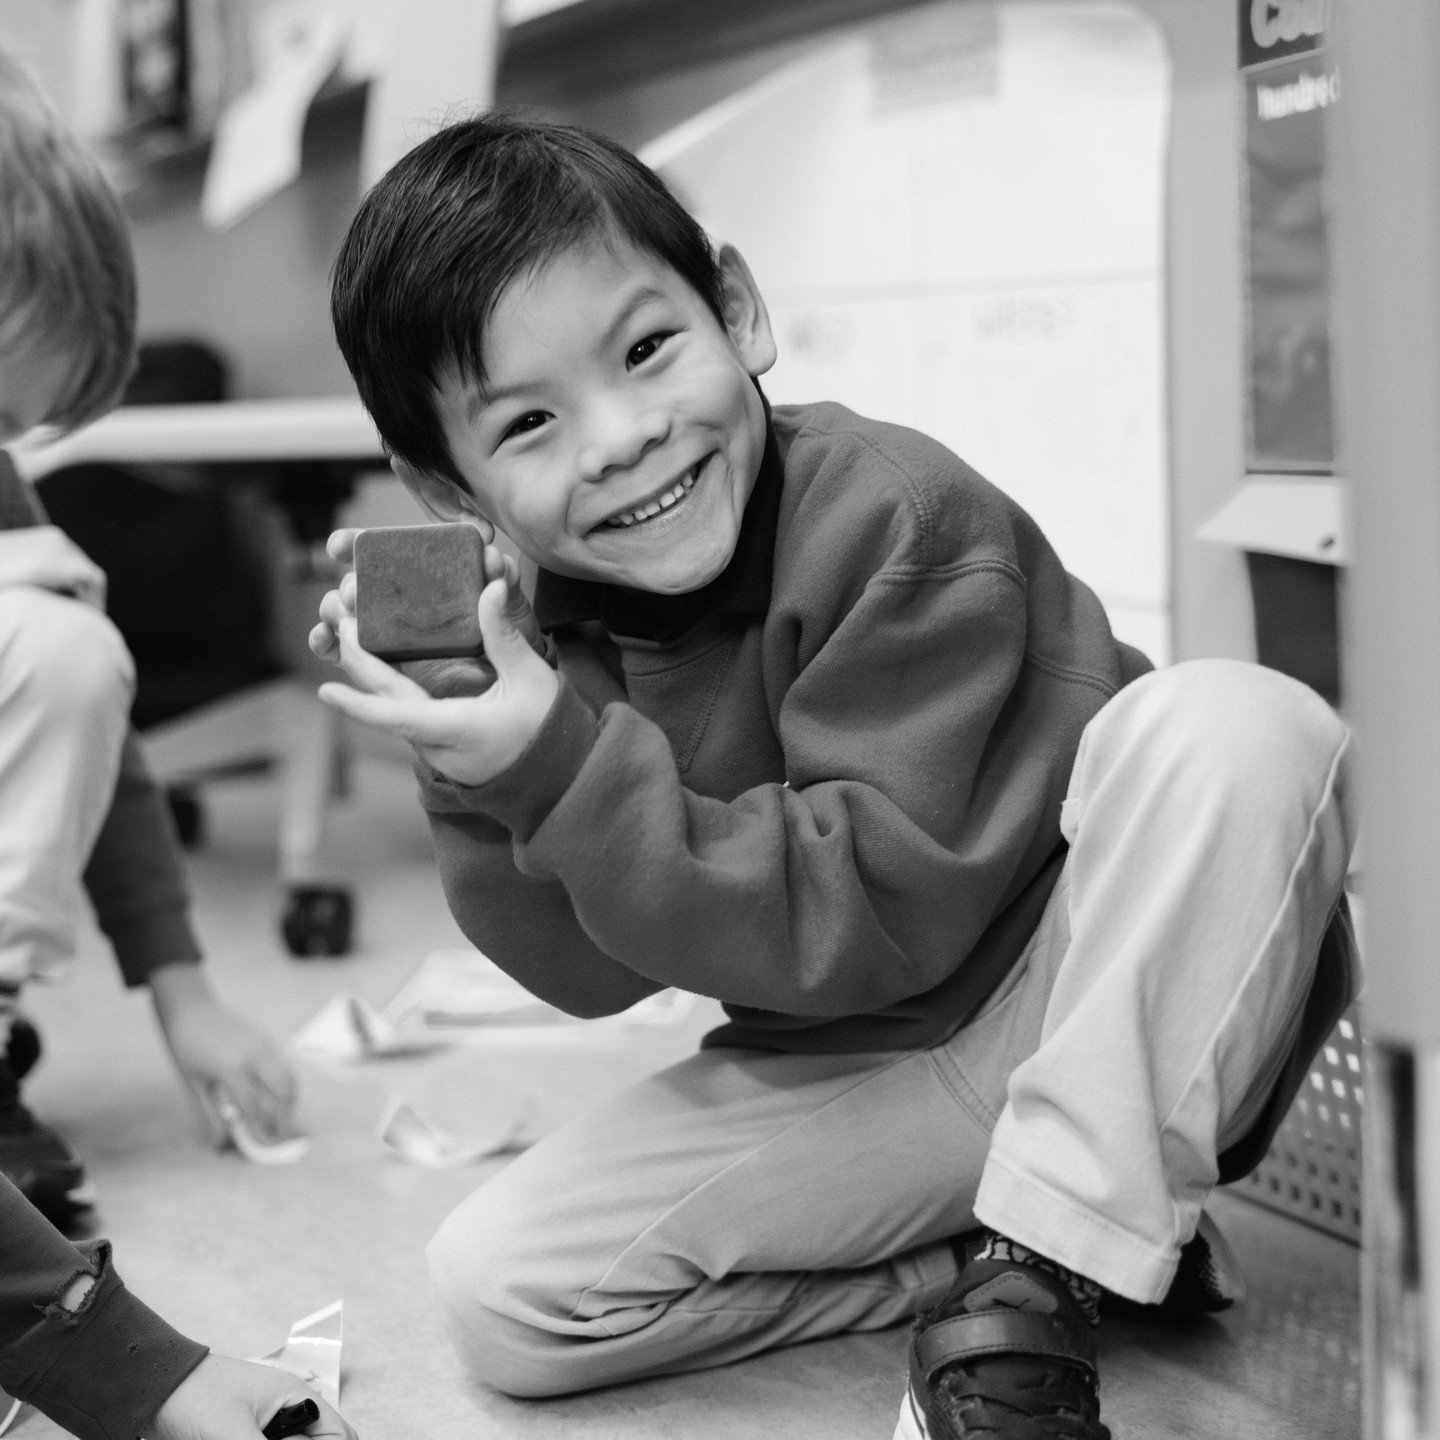 Hear about joy in learning at Browning in our breakout room at the @ParentsLeagueNYC Kindergarten Fair next Tuesday, April 16! ⁠
⁠
Our Lower School Head, Director of Admission, and some Browning students will be on hand to give you an introduction be